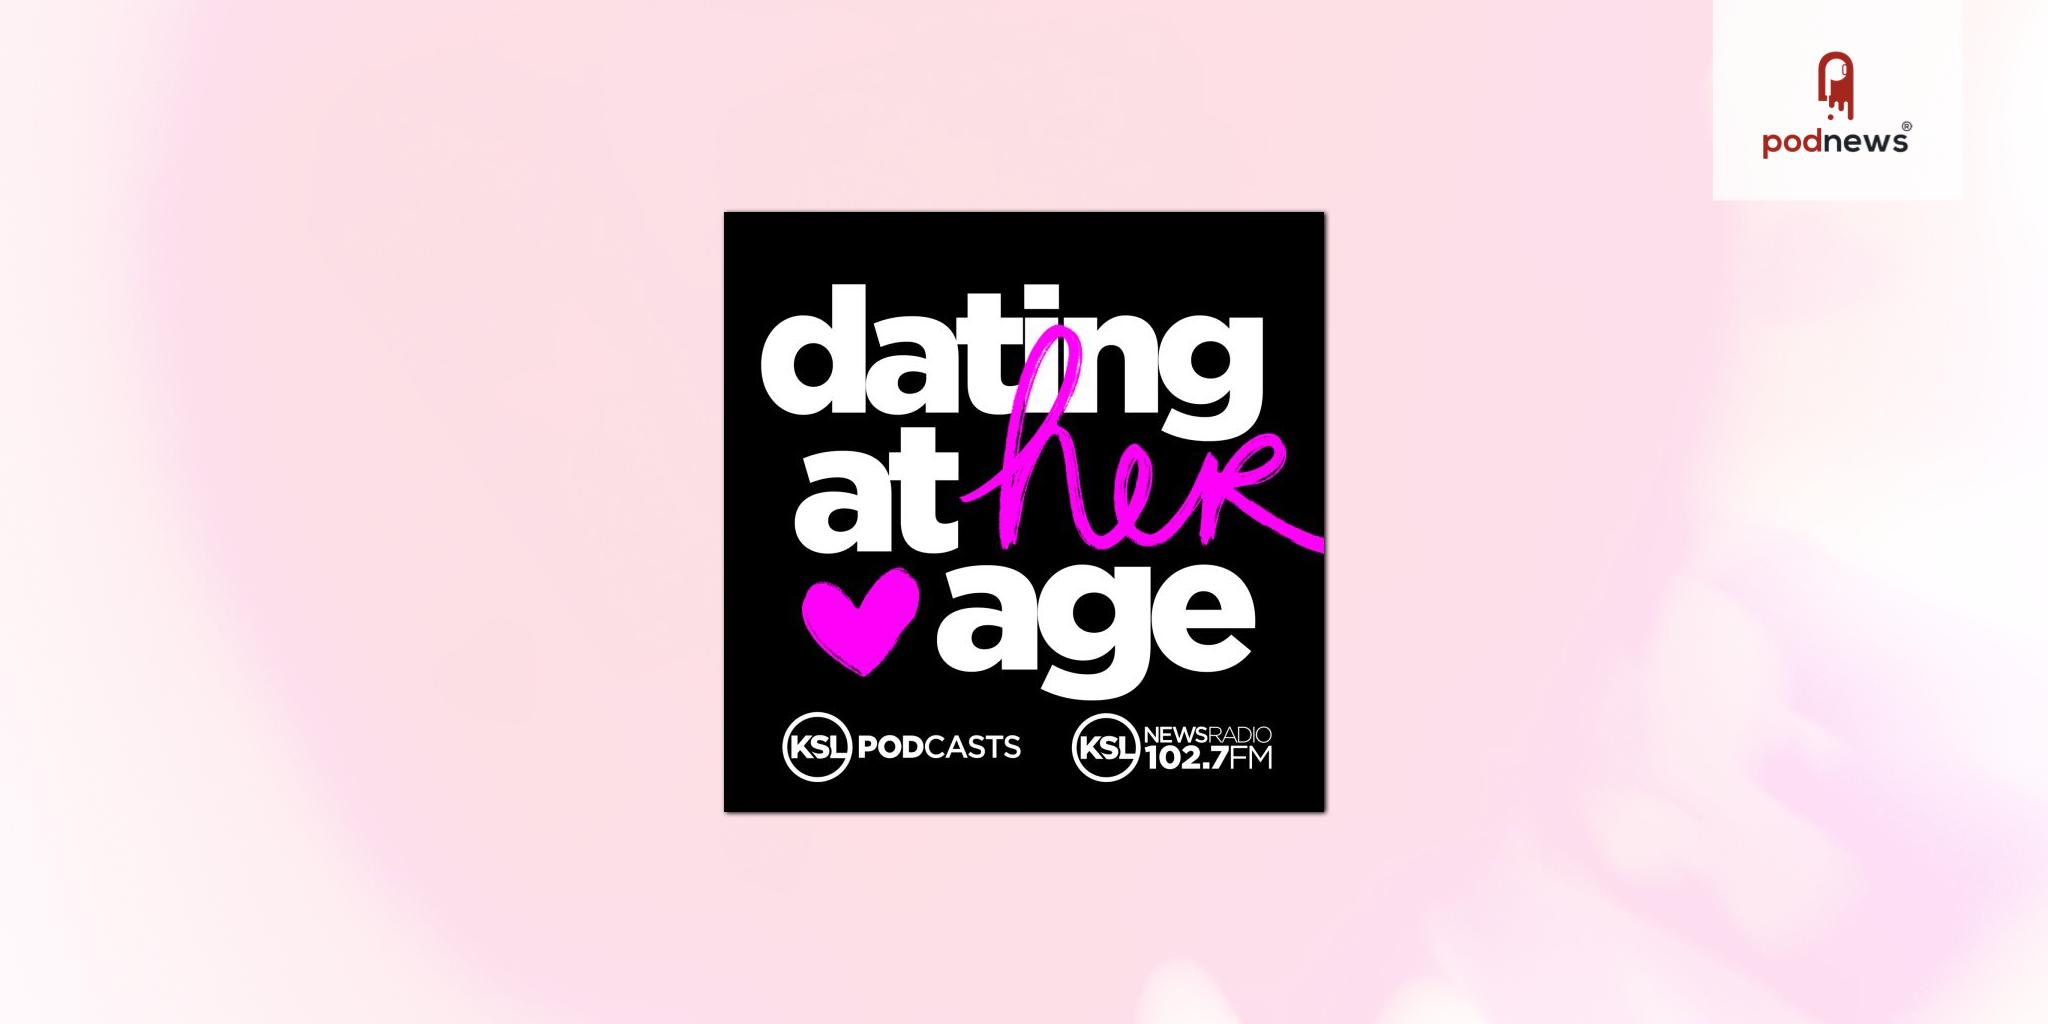 KSL Announces New Podcast “Dating at Her Age” with Hosts Debbie Dujanovic and Caitlyn Johnston